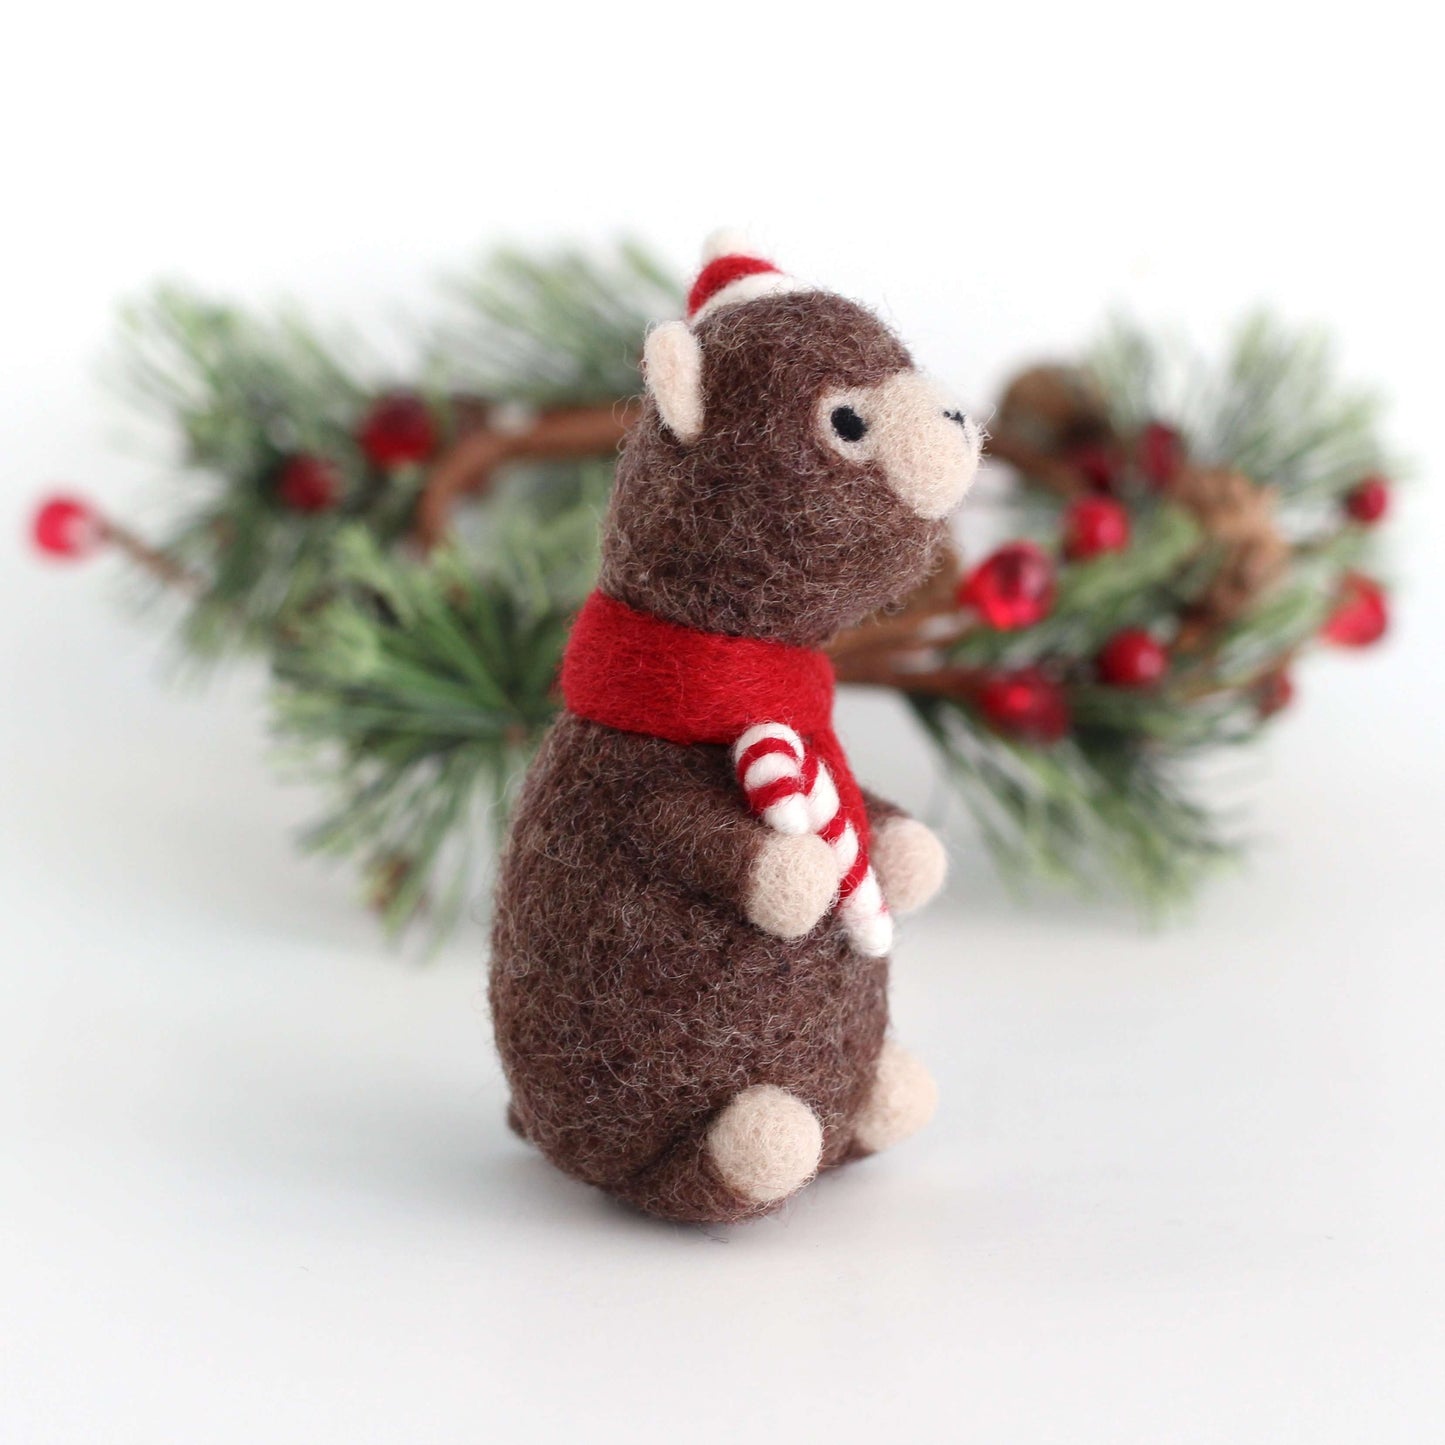 Needle Felted Alpaca holding Candy Cane by Wild Whimsy Woolies